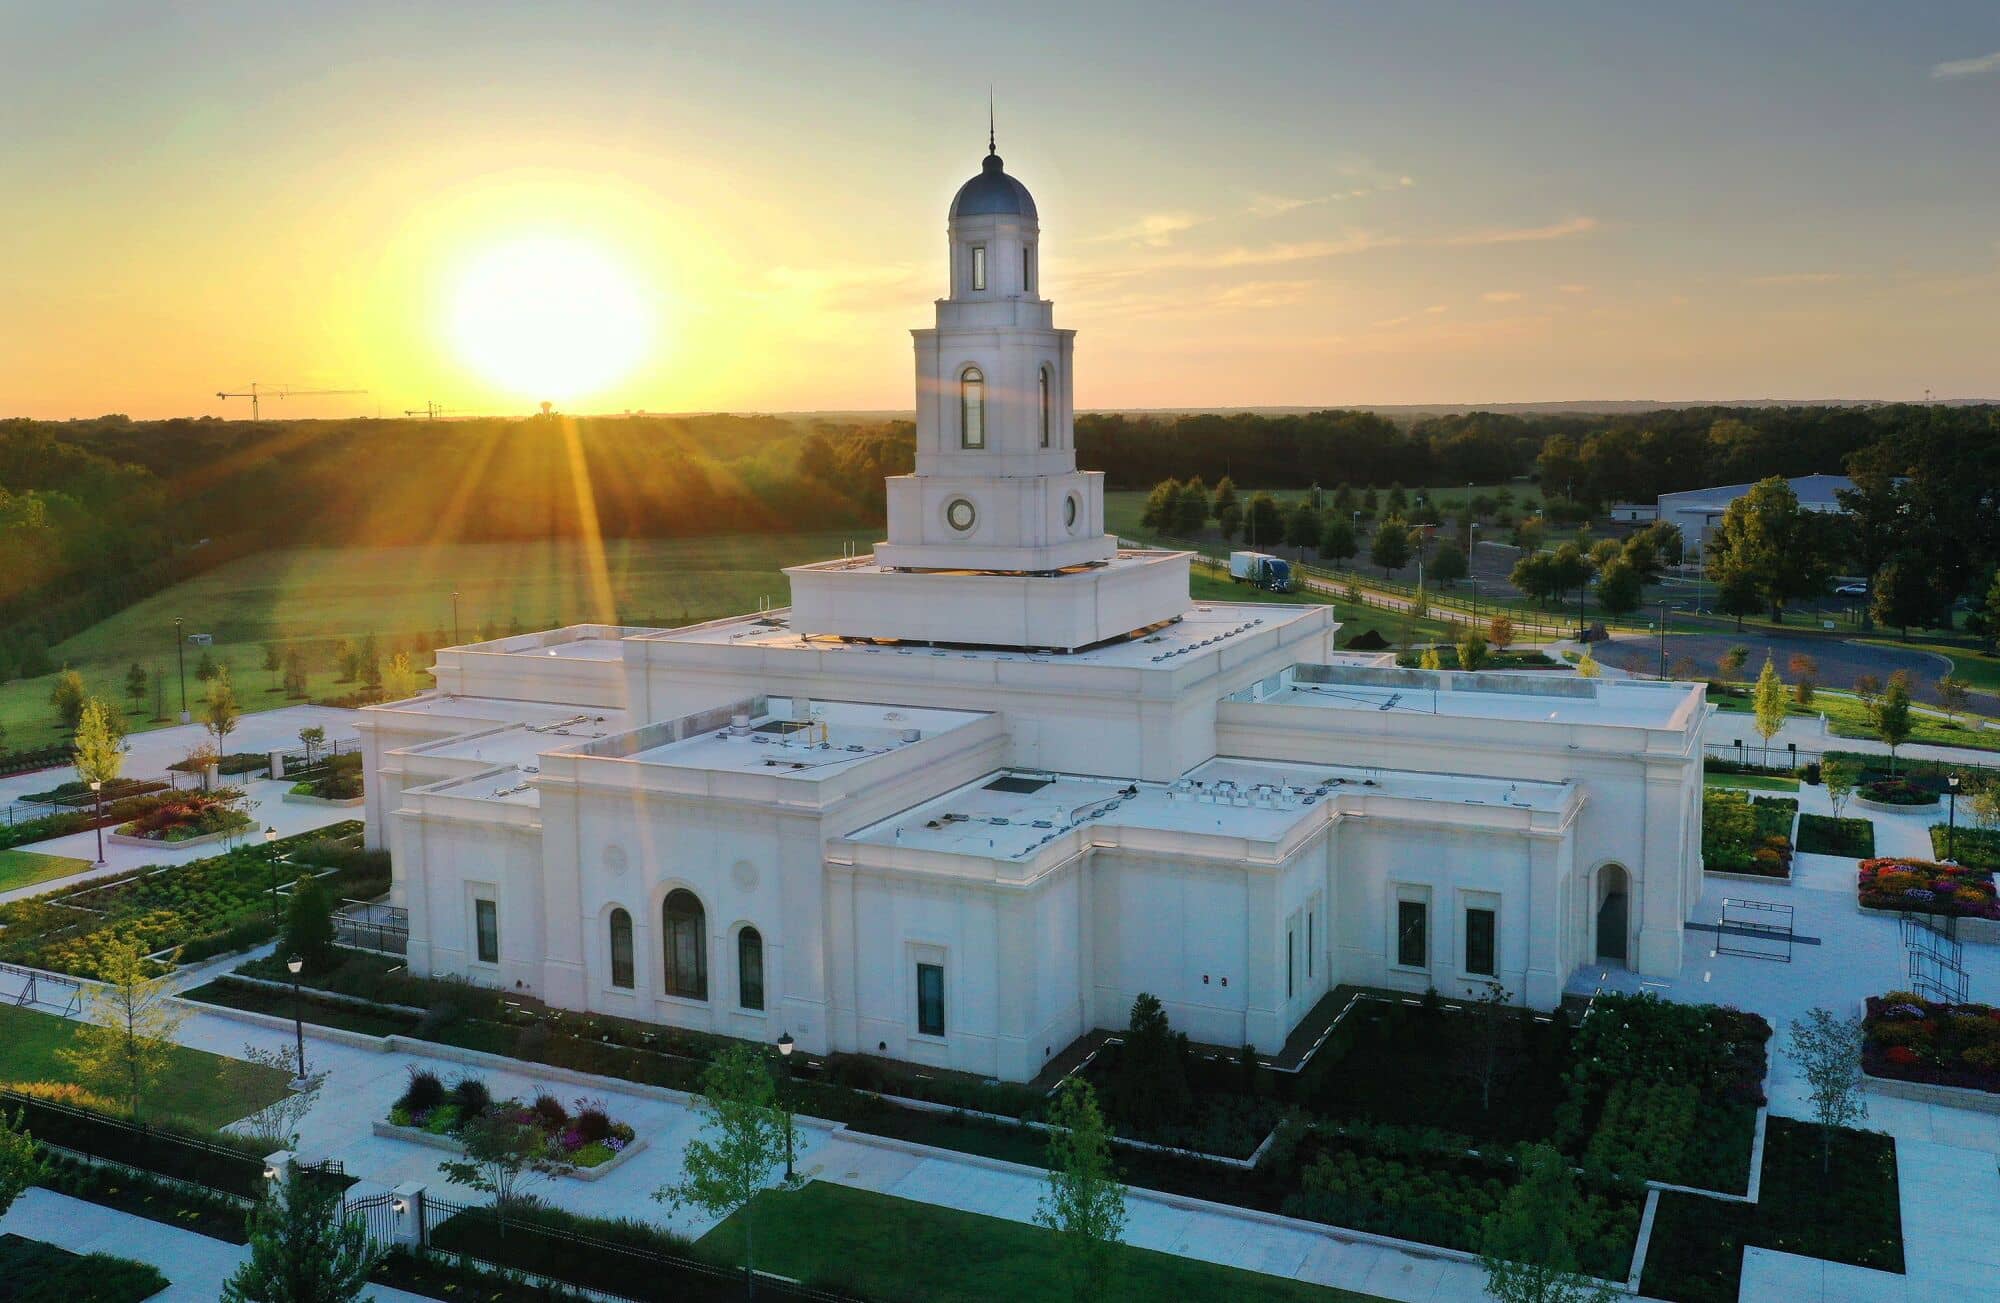 The Bentonville Arkansas Temple, a white one-story building with a center spire.